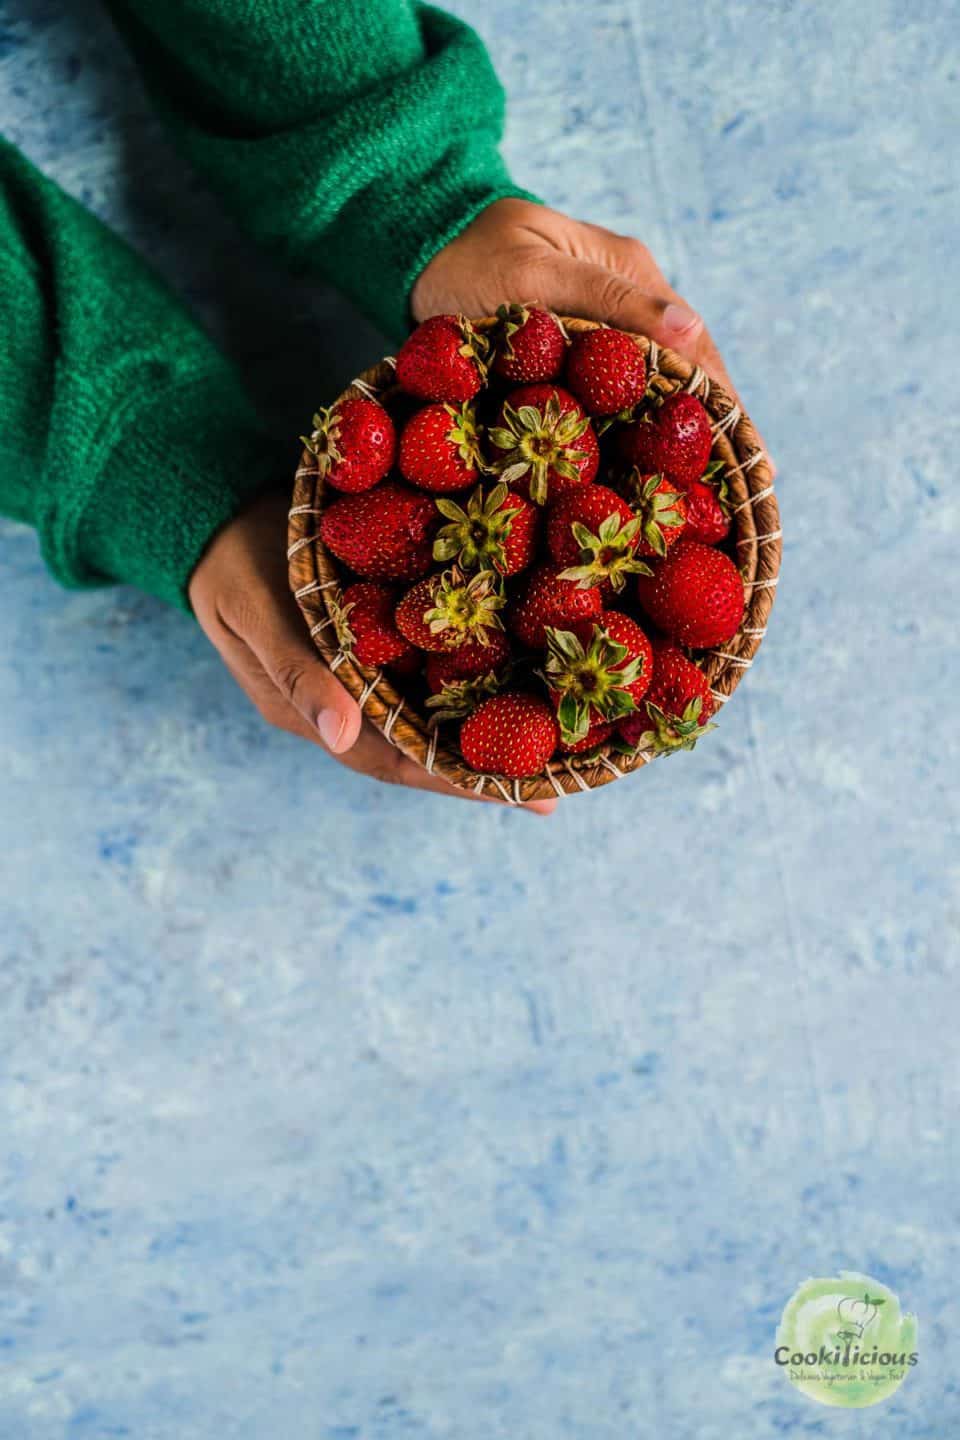 a set of hands holding a small basket filled with strawberries